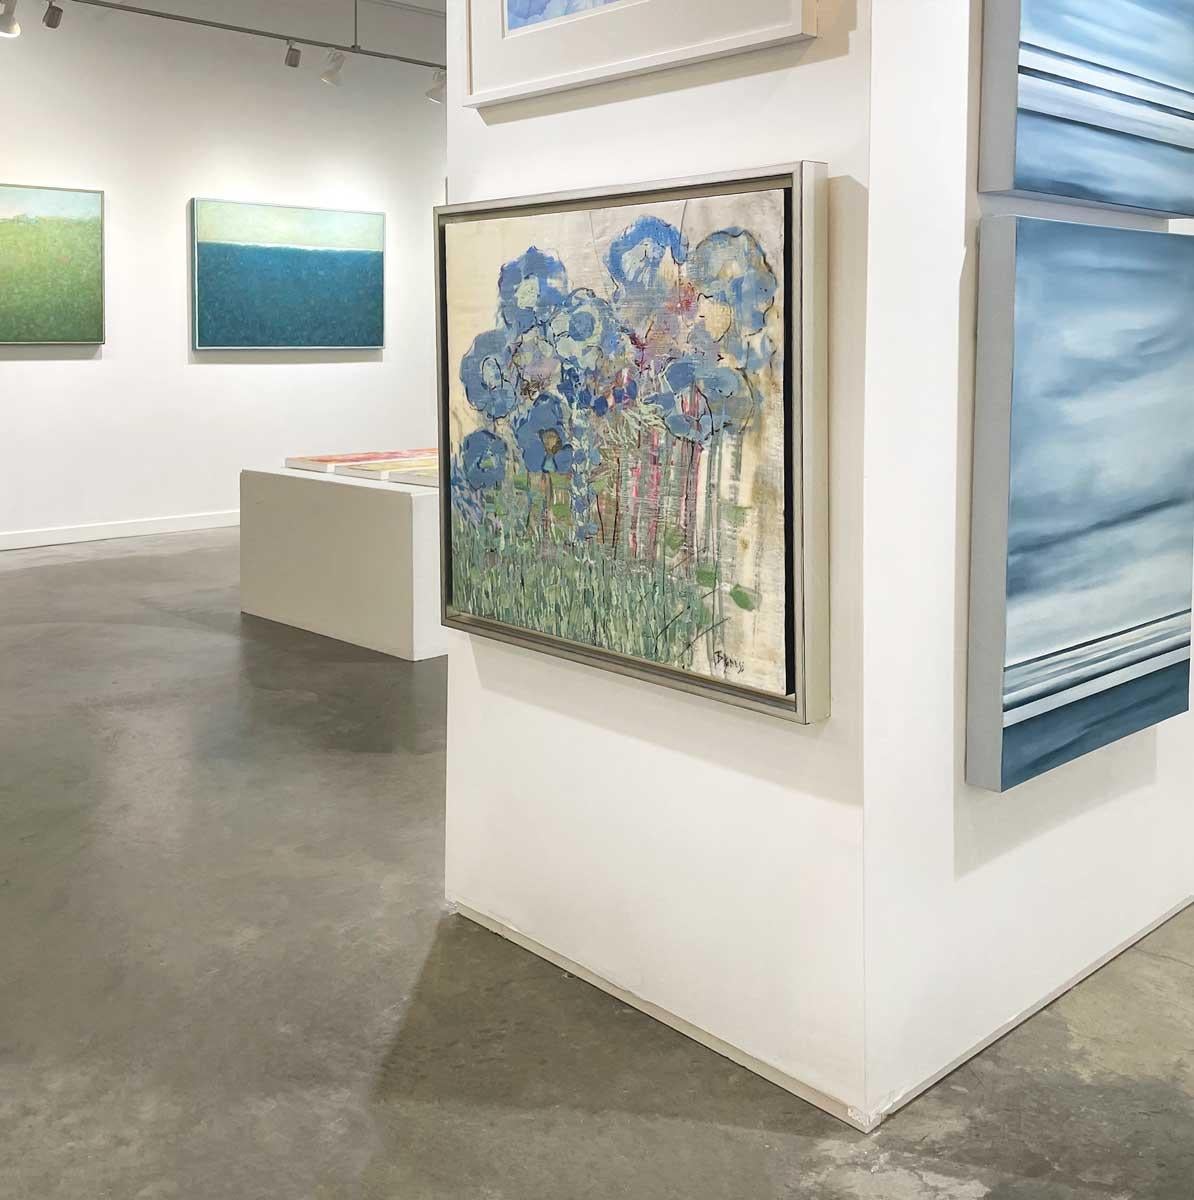 This abstract encaustic painting by artist Linda Bigness features a highly textured floral composition. Blue floral shapes are clustered at the center of the piece, with green layers and strokes beneath it and purple and pink accents visible around